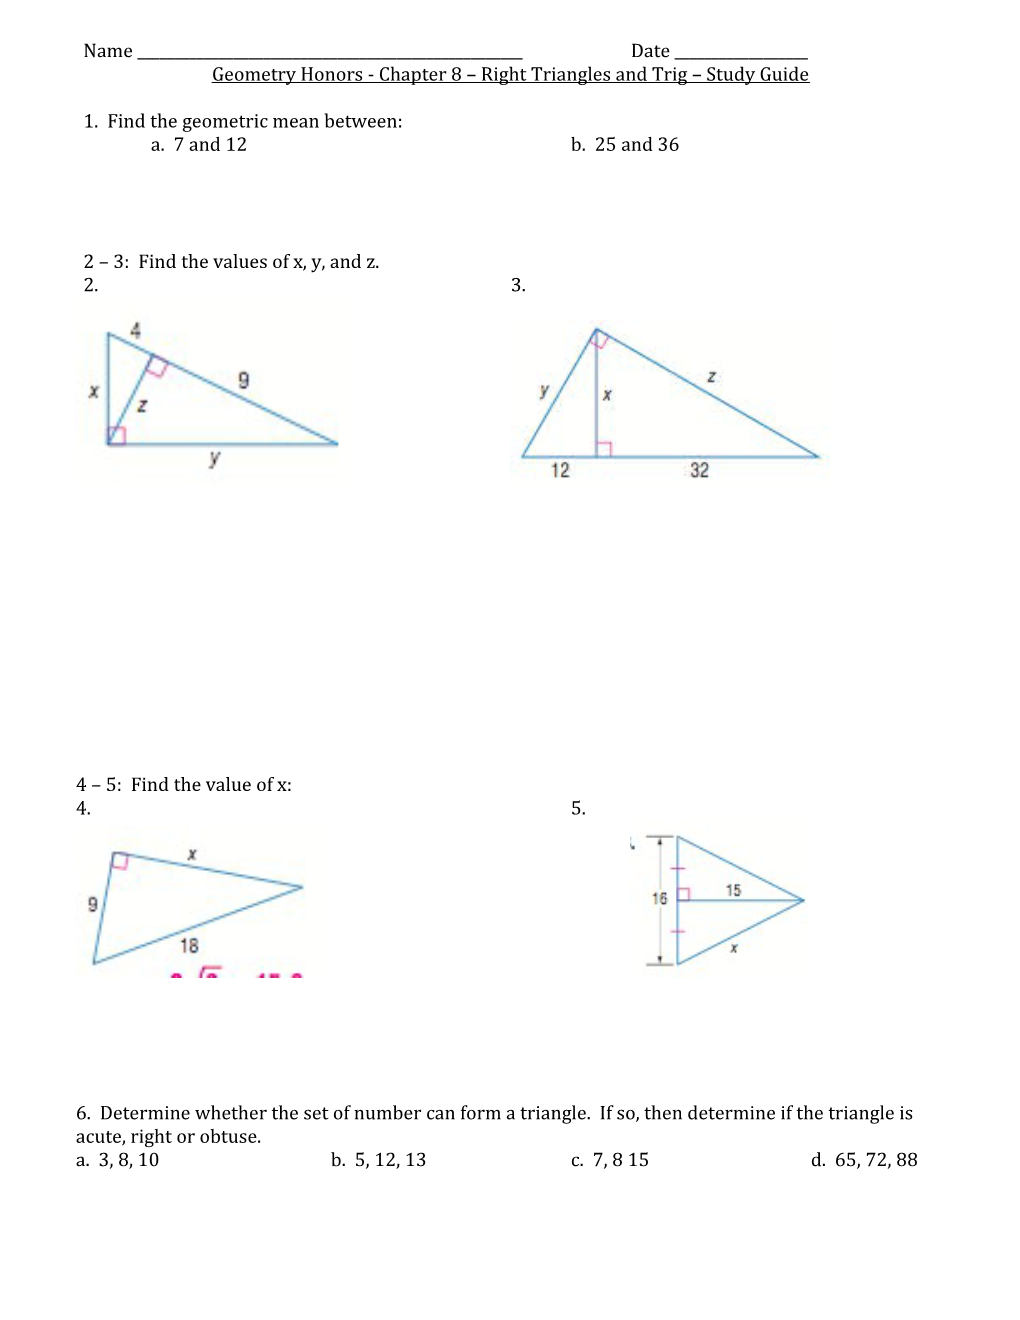 Geometry Honors - Chapter 8 Right Triangles and Trig Study Guide